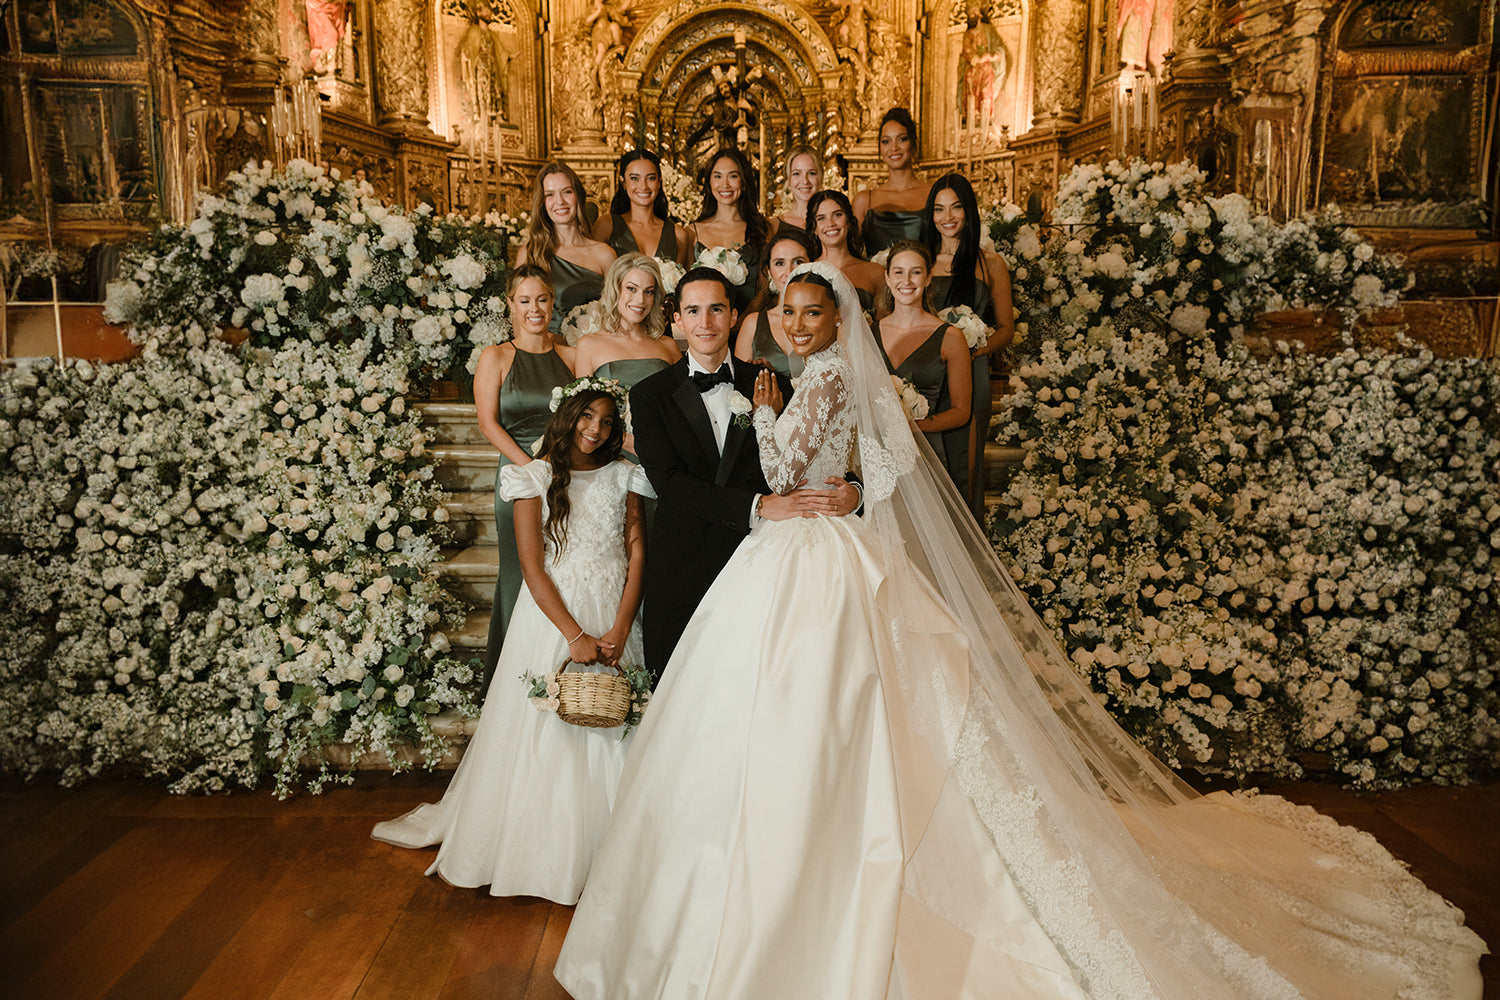 Jasmine Tooks wearing Zuhair Murad wedding gown standing next to her flower girl Chloe wearing Miele Moda gown with her bridal party and husband Juan David Borrero in front of the alter